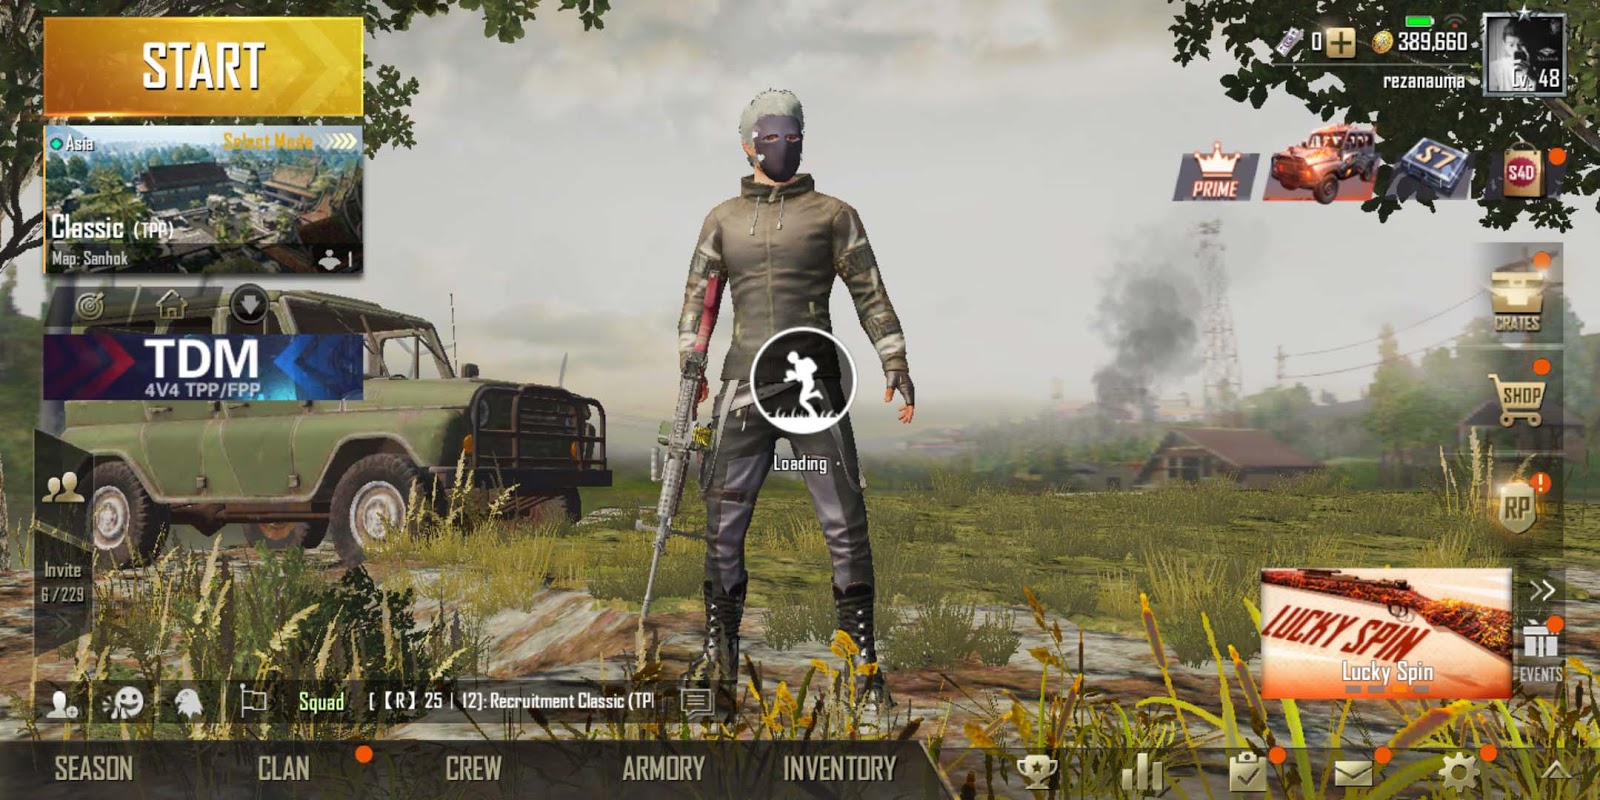 Download failed because you may not have purchased this app pubg mobile что делать фото 3